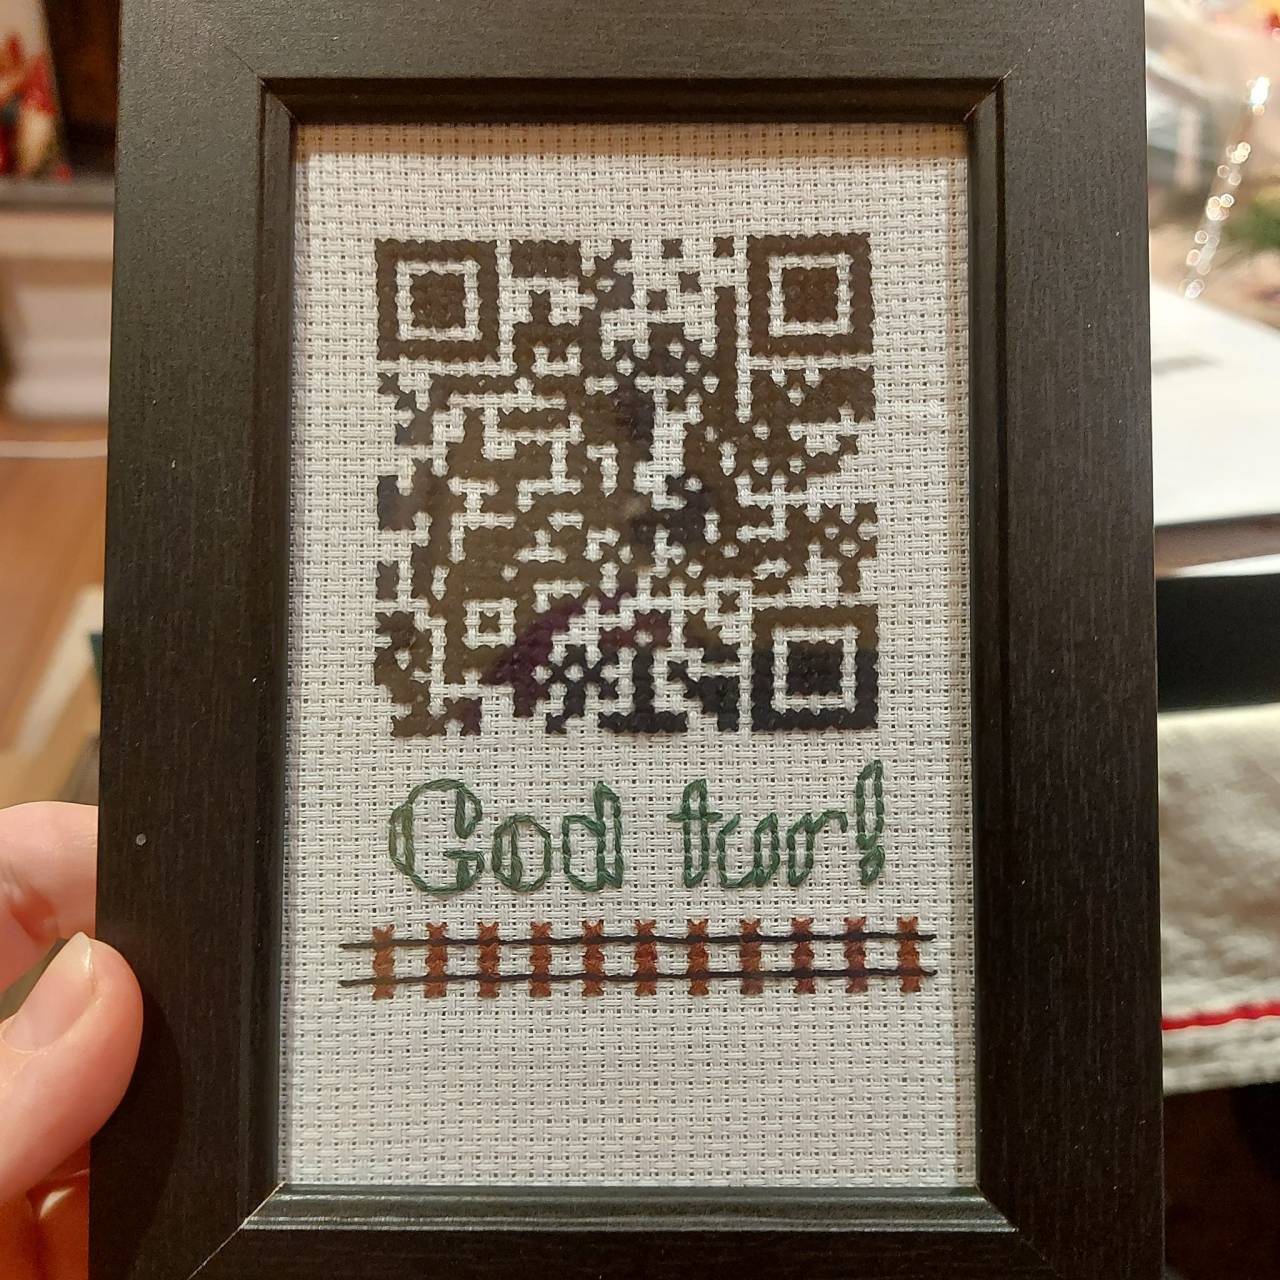 Why you should absolutely cross-stitch a QR code